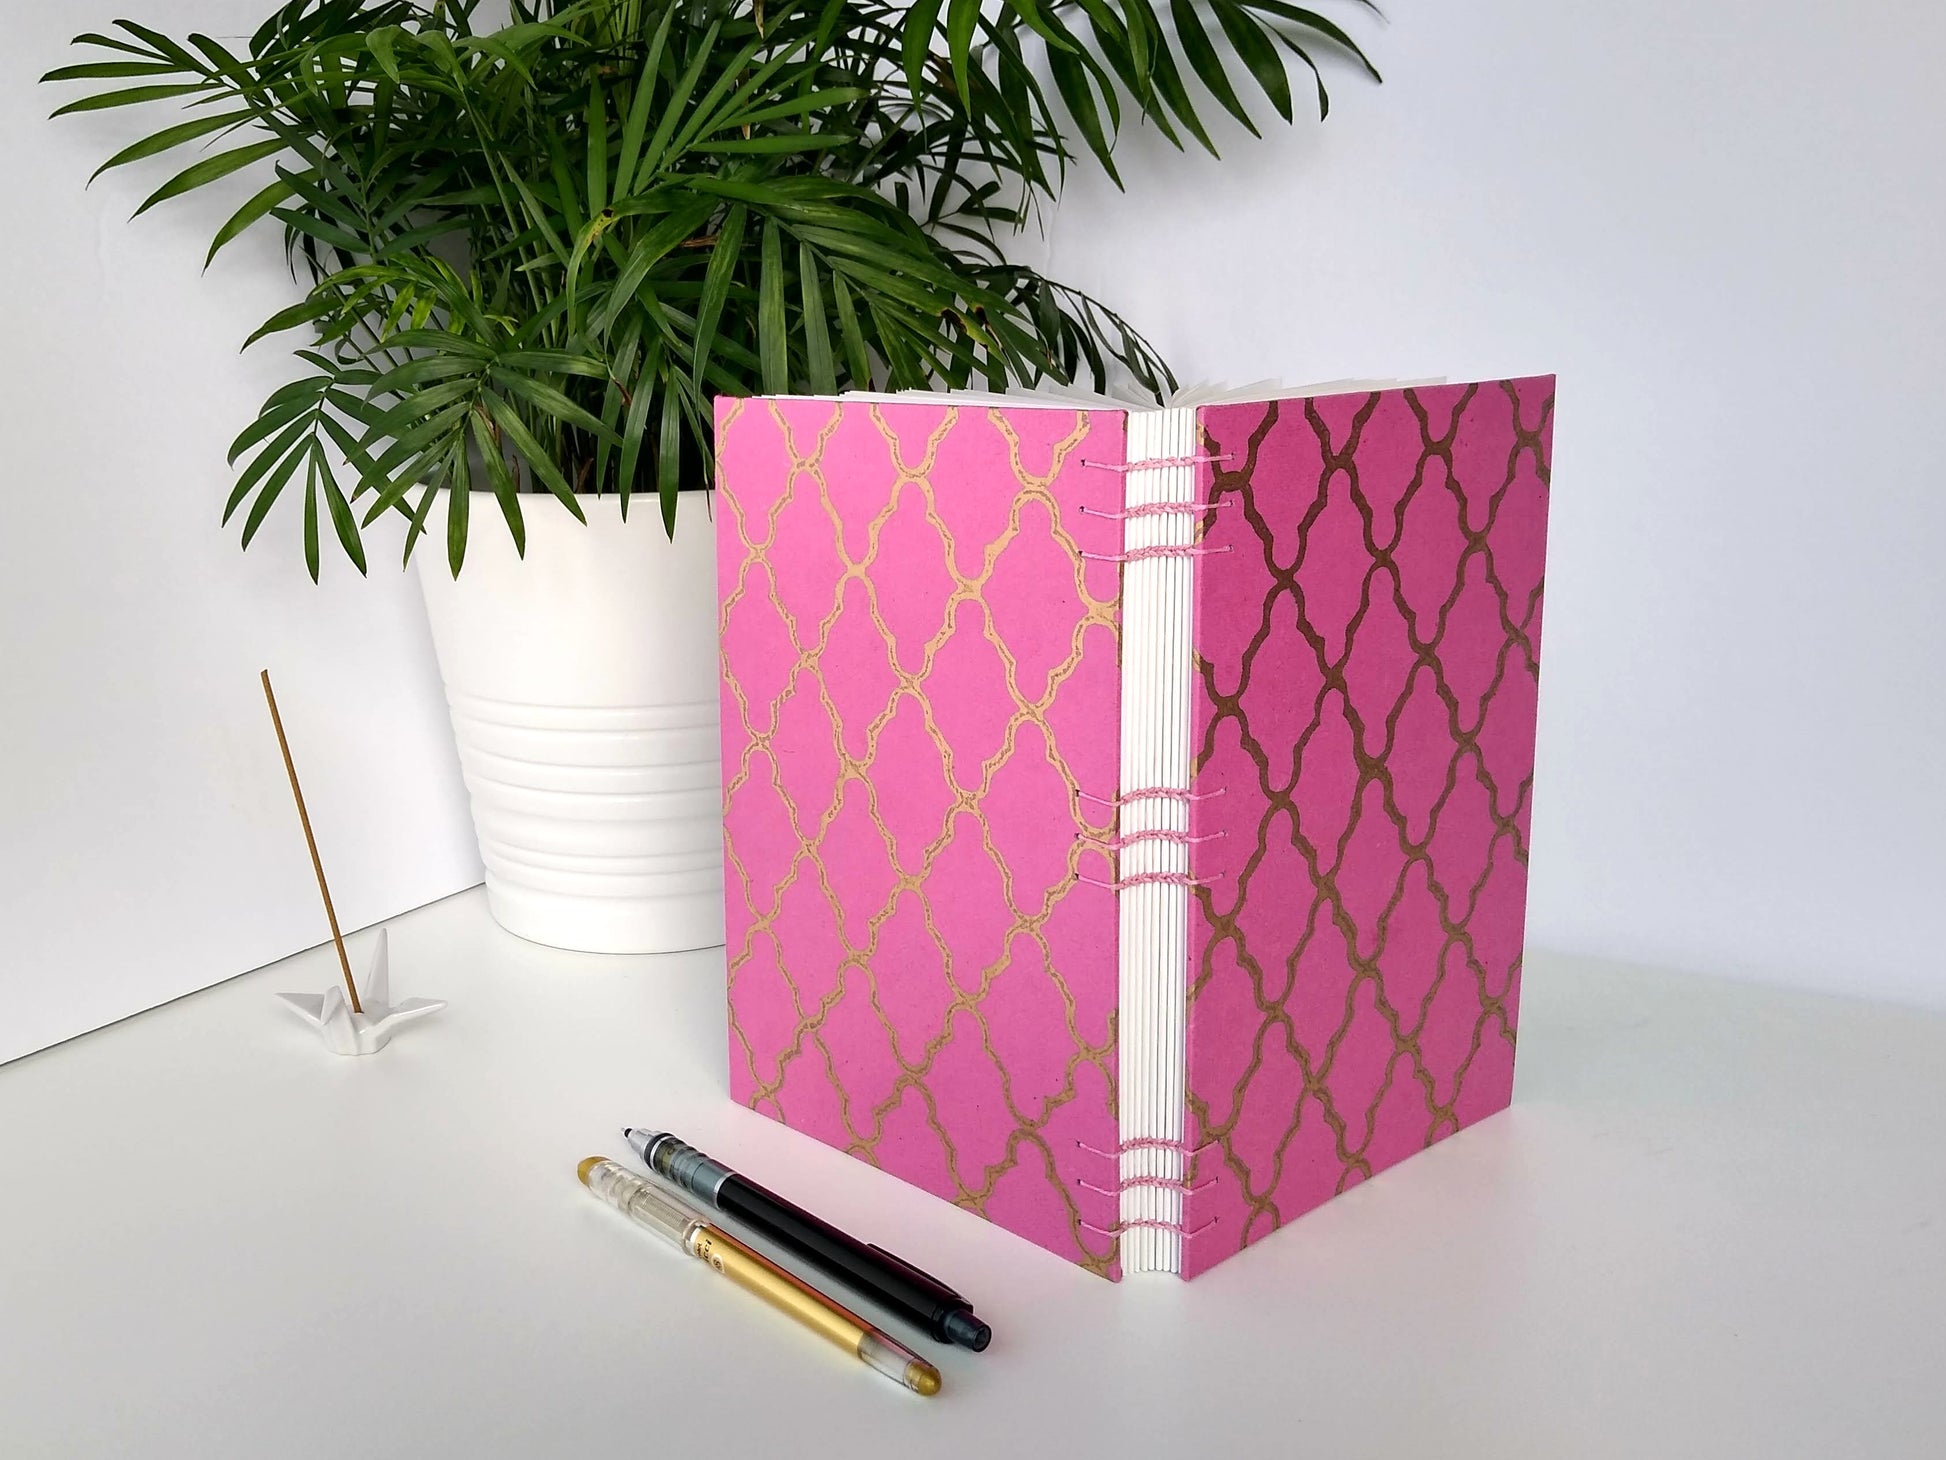 A handmade journal sits upright beside a potted plant, a ceramic crane, a gold pen, and a black mechanical pencil. The cover of the journal is pink with a gold quatrefoill design across the front. The journal is turned to show the open spine with pink stitching to hold it together.